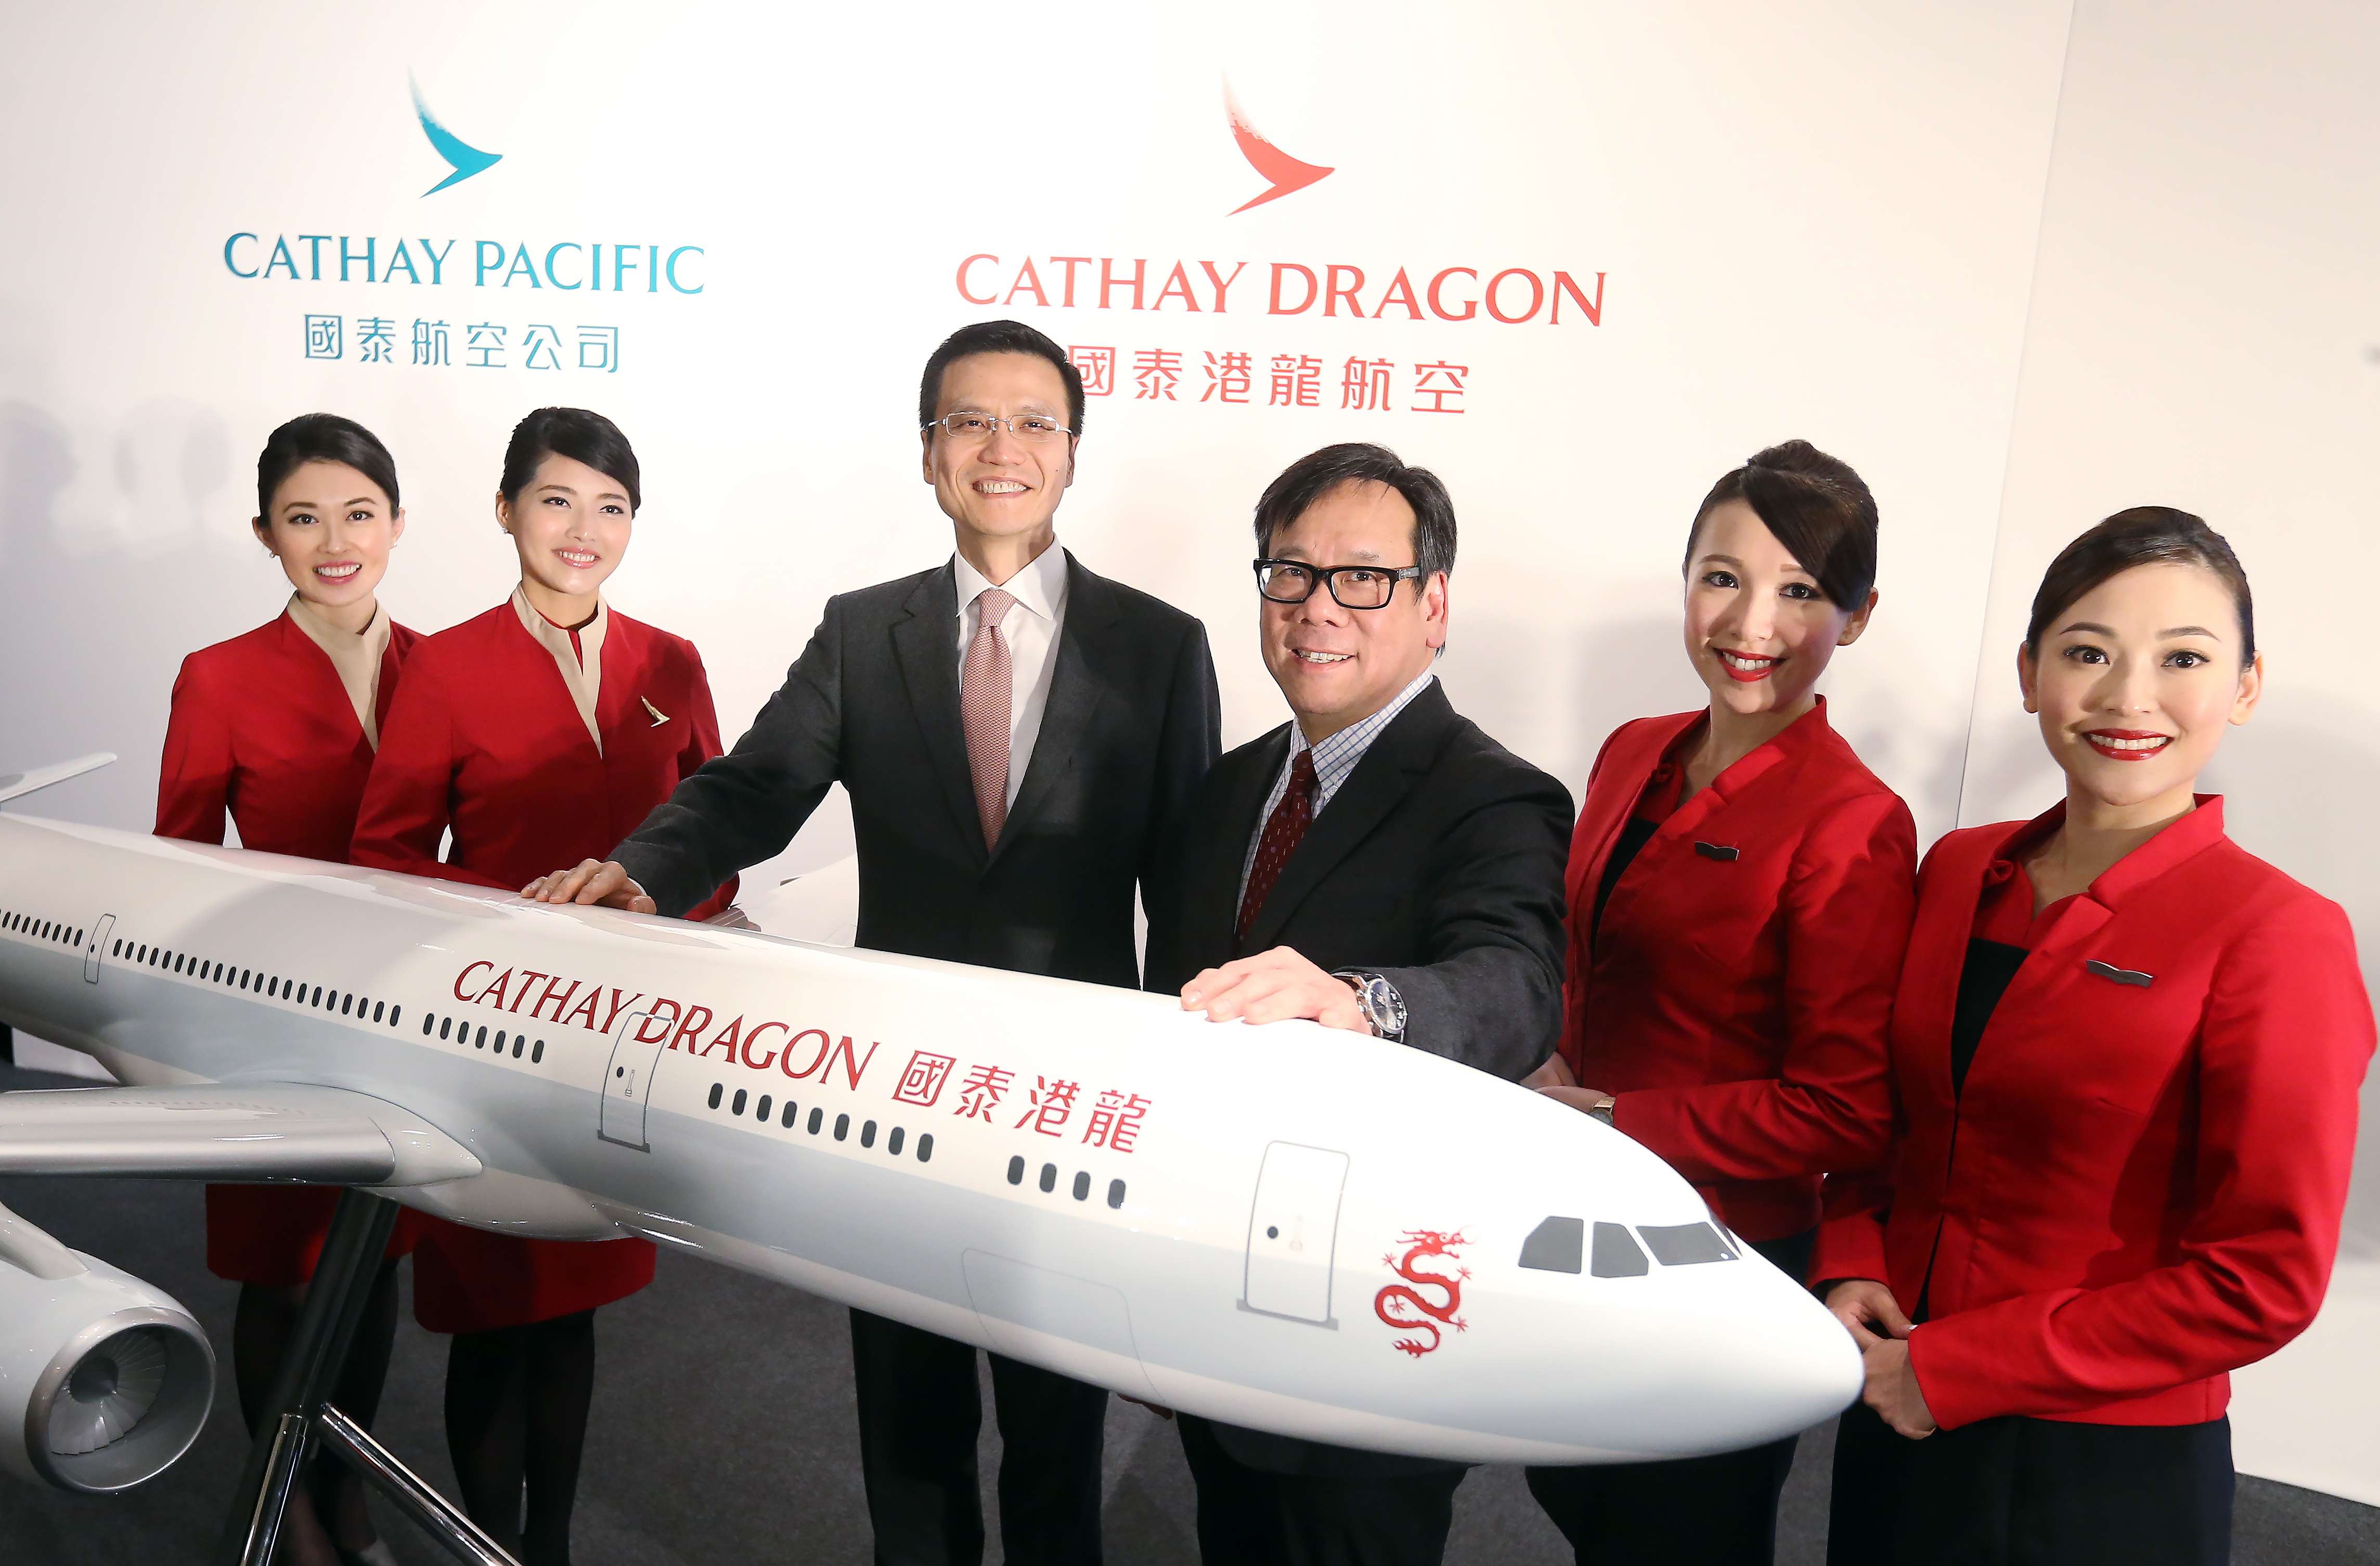 Cathay chief executive Ivan Chu (third from left) posed a picture with Algernon Yau (fourth from left) and other staff members at a press conference on Dragonair’s rebranding in January. Photo: Dickson Lee